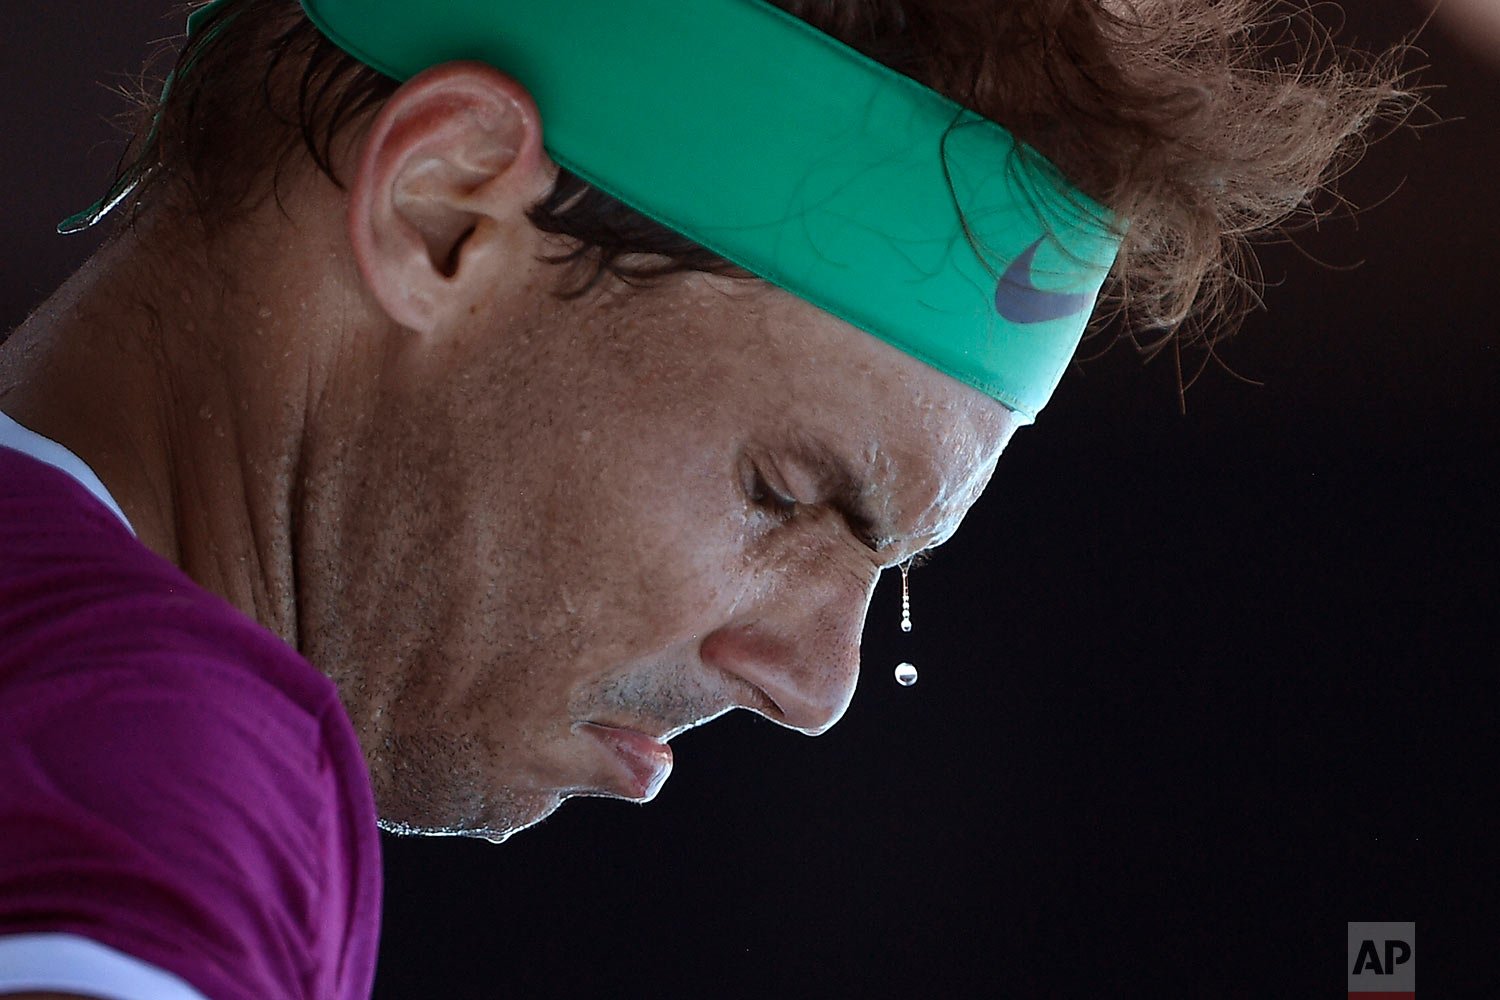  Sweat drops from the face of Rafael Nadal, of Spain, during a break in his second round match against Yannick Hanfmann, of Germany, at the Australian Open tennis championships in Melbourne, Australia, Wednesday, Jan. 19, 2022. (AP Photo/Andy Brownbi